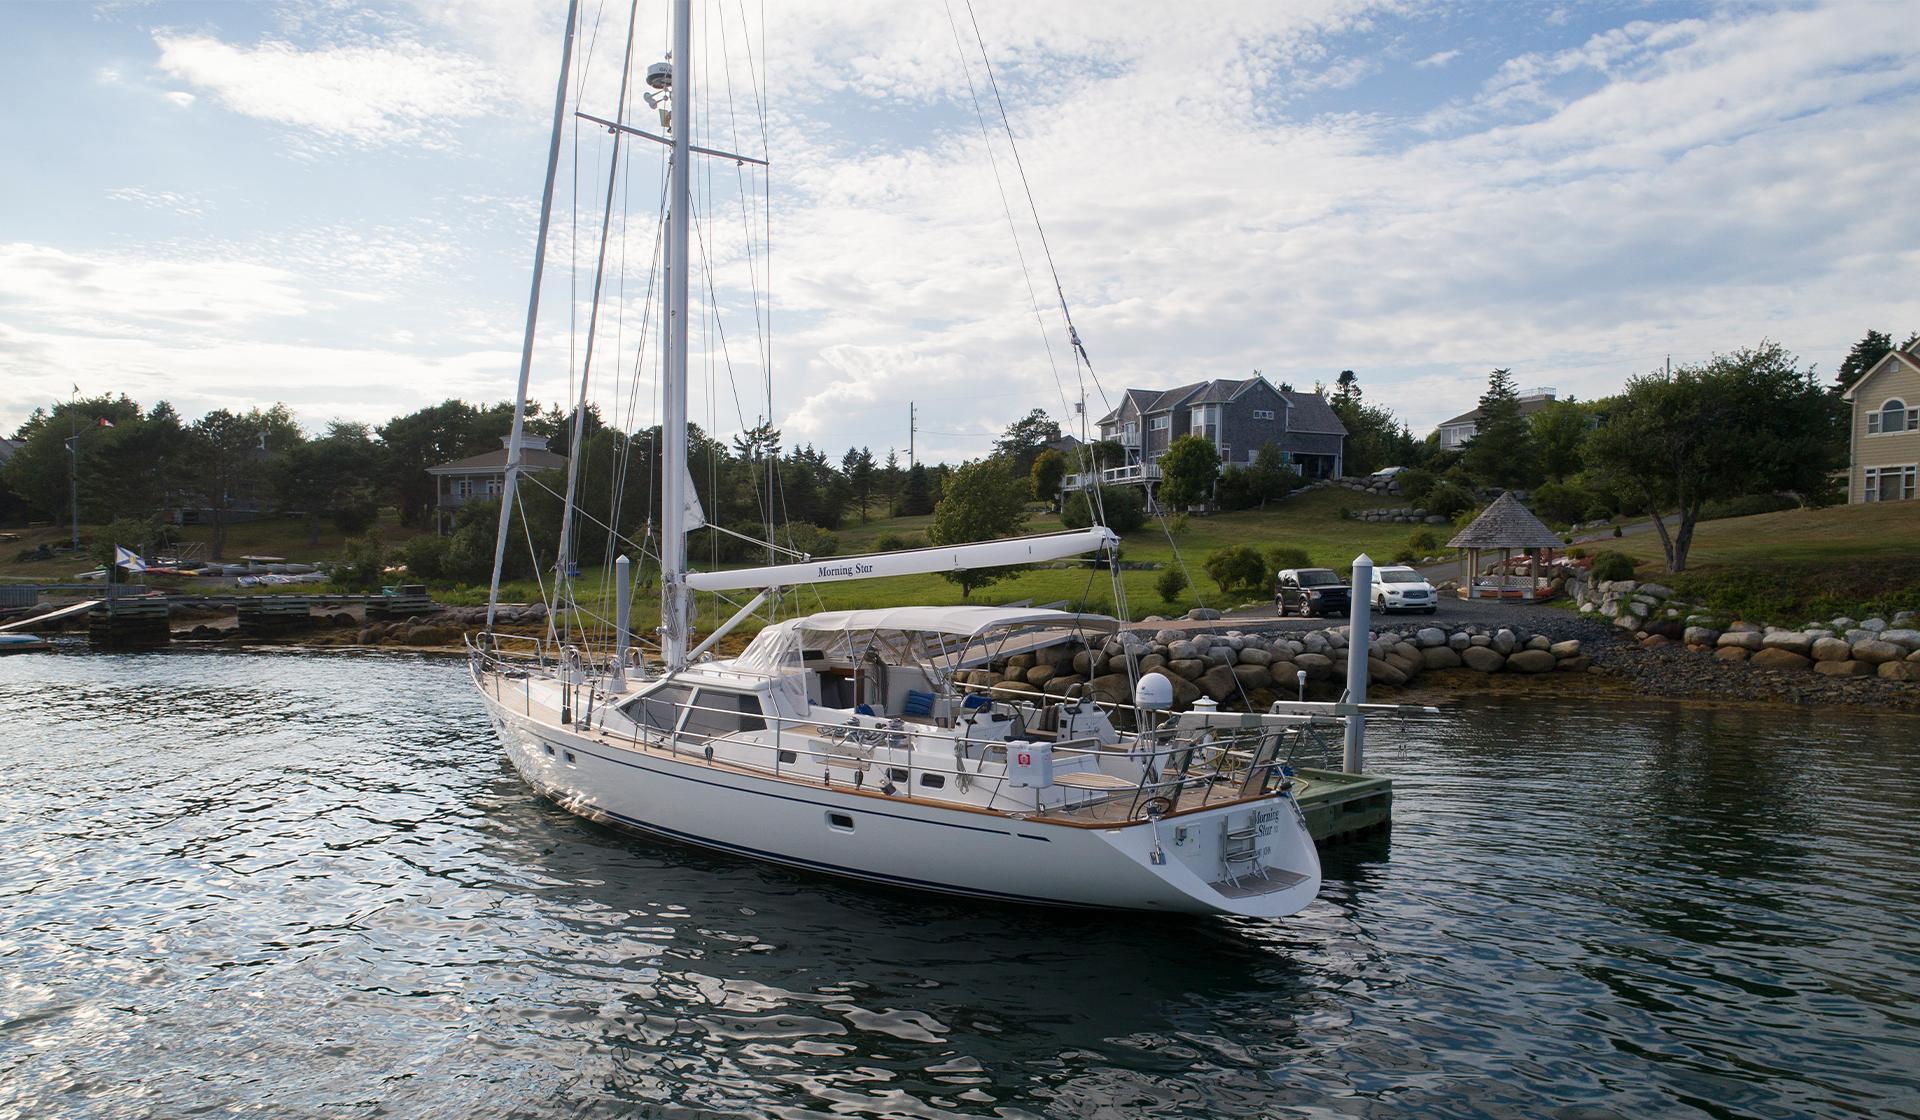 Morning Star Yacht for Sale | 63 Oyster Yachts Chester, Canada | Denison Yacht Sales